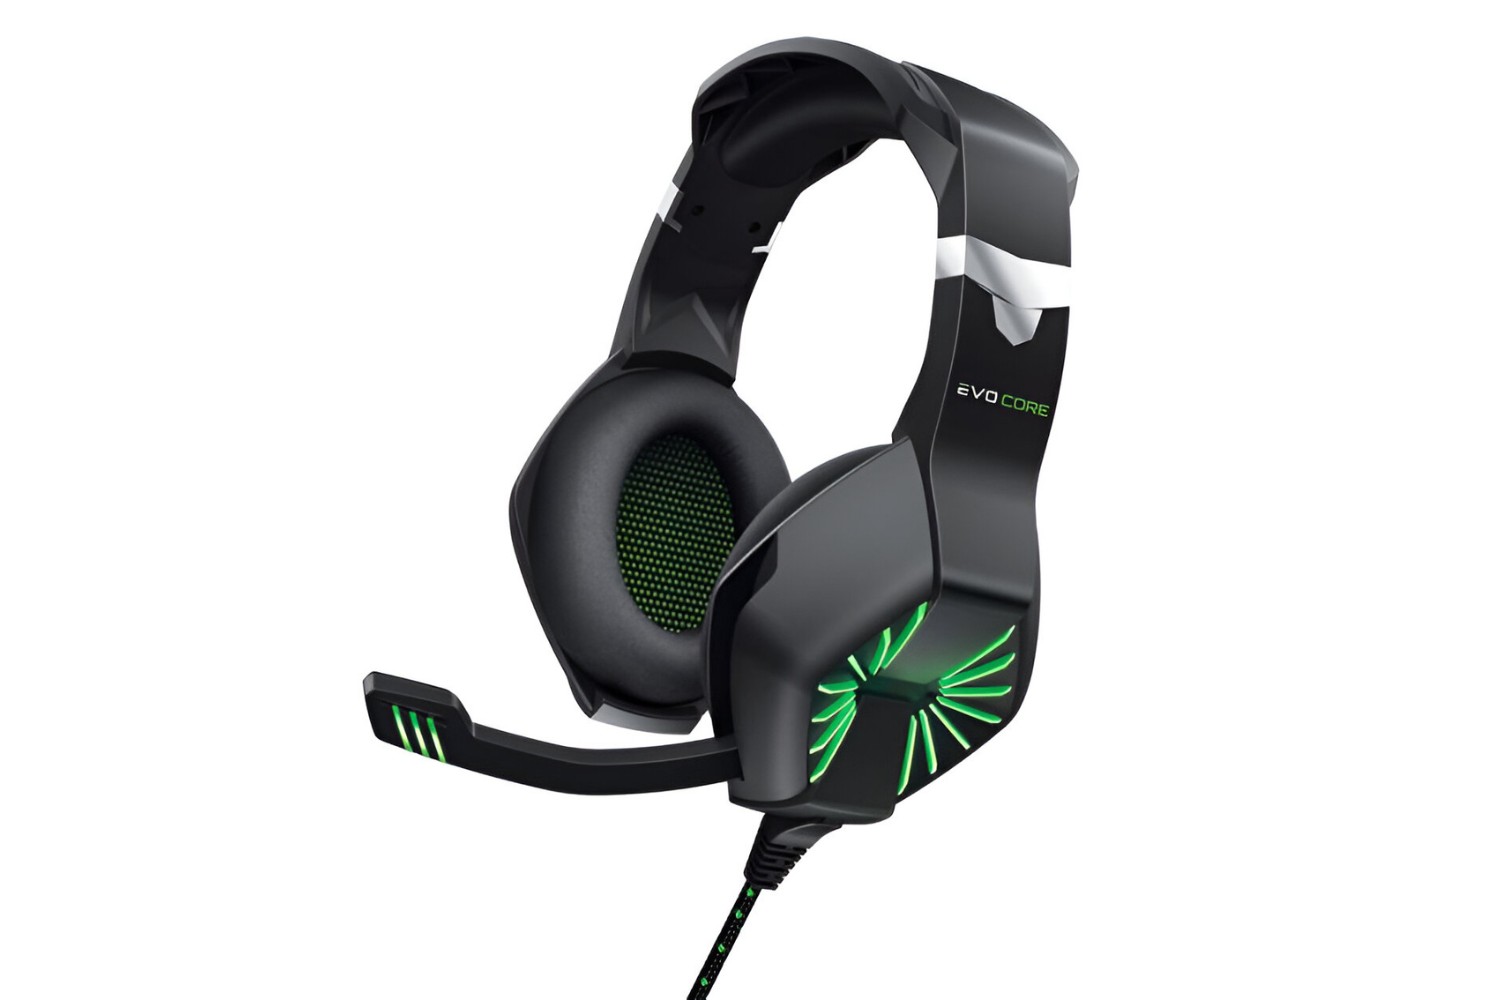 Phenom Next Gaming Headset Evo Core For Xbox One: How To Connect To PC